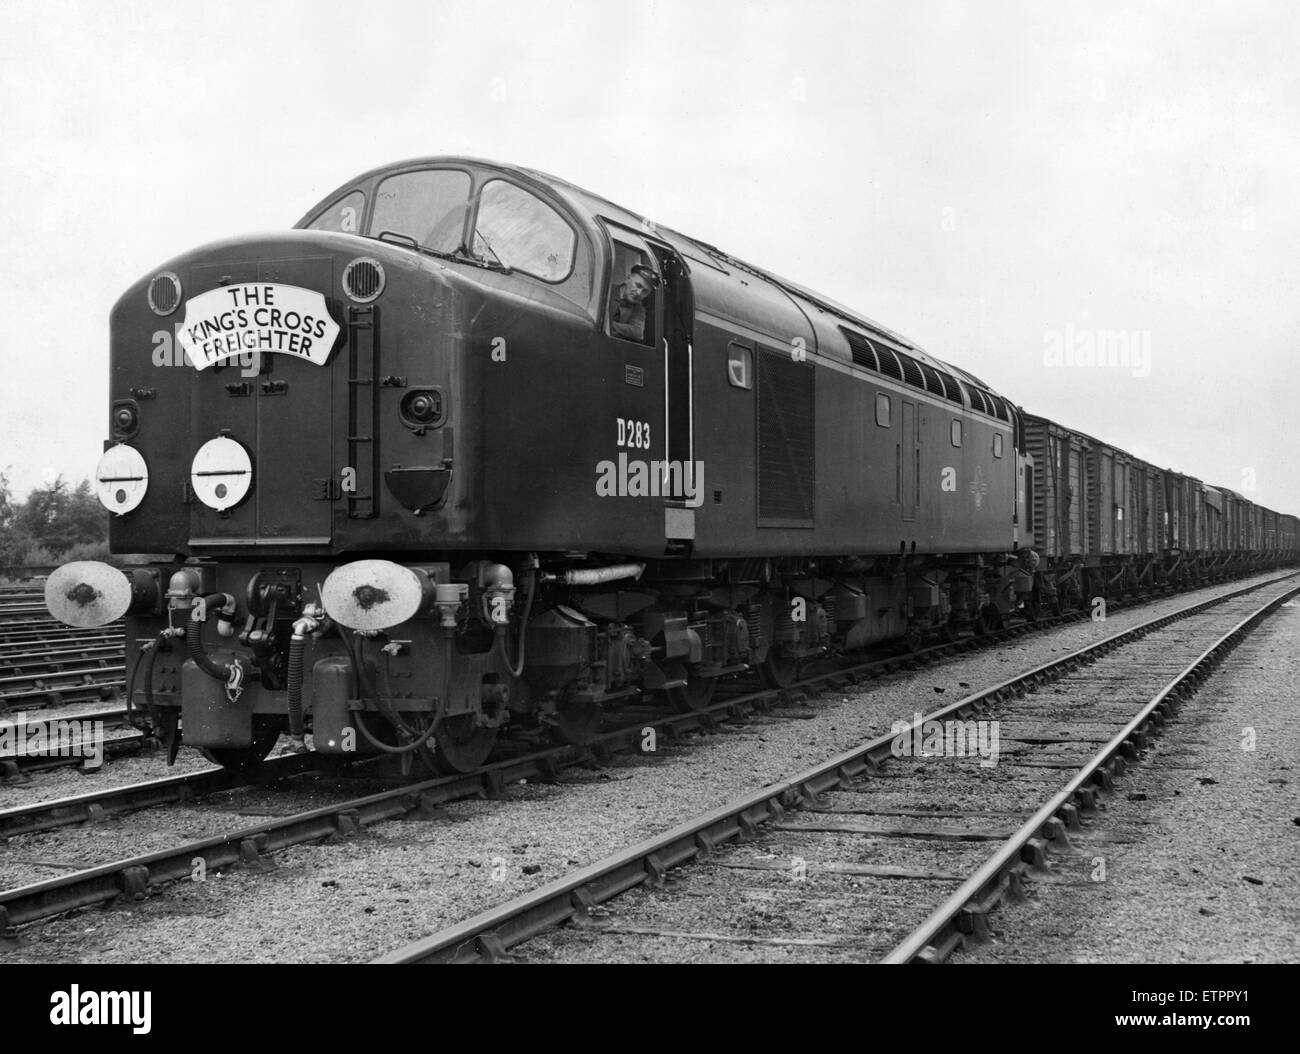 The Kings Cross Freighter, Class C freight train, departing from Park Lane Depot, Gateshead at 1925pm with a King's Cross Assured Arrival time of 0520am. The train was subject to a 50 wagon limit. Pictured, 24th August 1960. The Locomotive is a D283, Electric type 4 diesel hauling goods train. Stock Photo